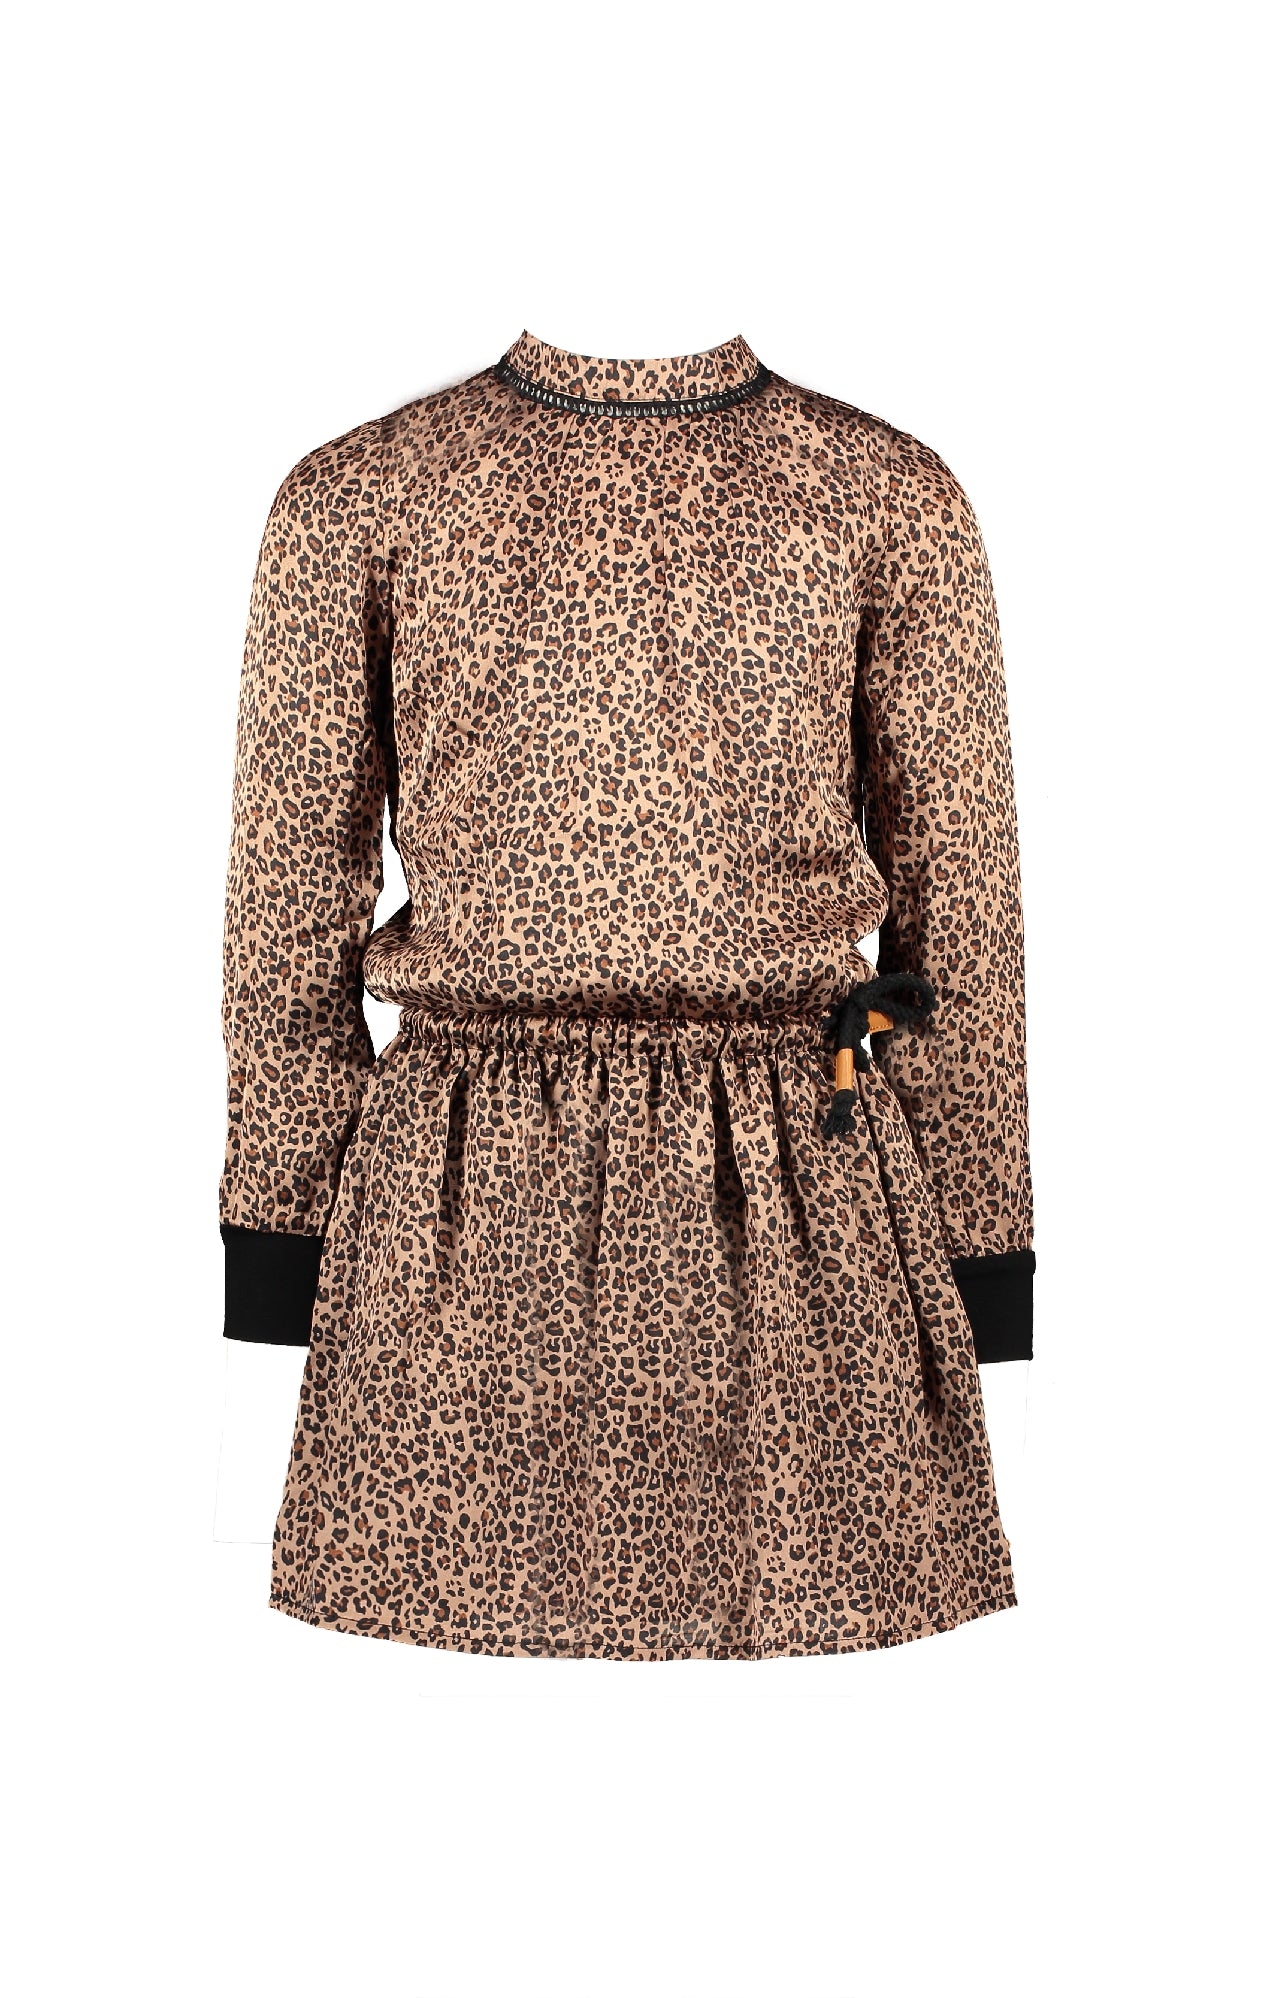 NoNo Minne animal AOP on satin dress with crochet detail at neck+jersey sleeve cuffs